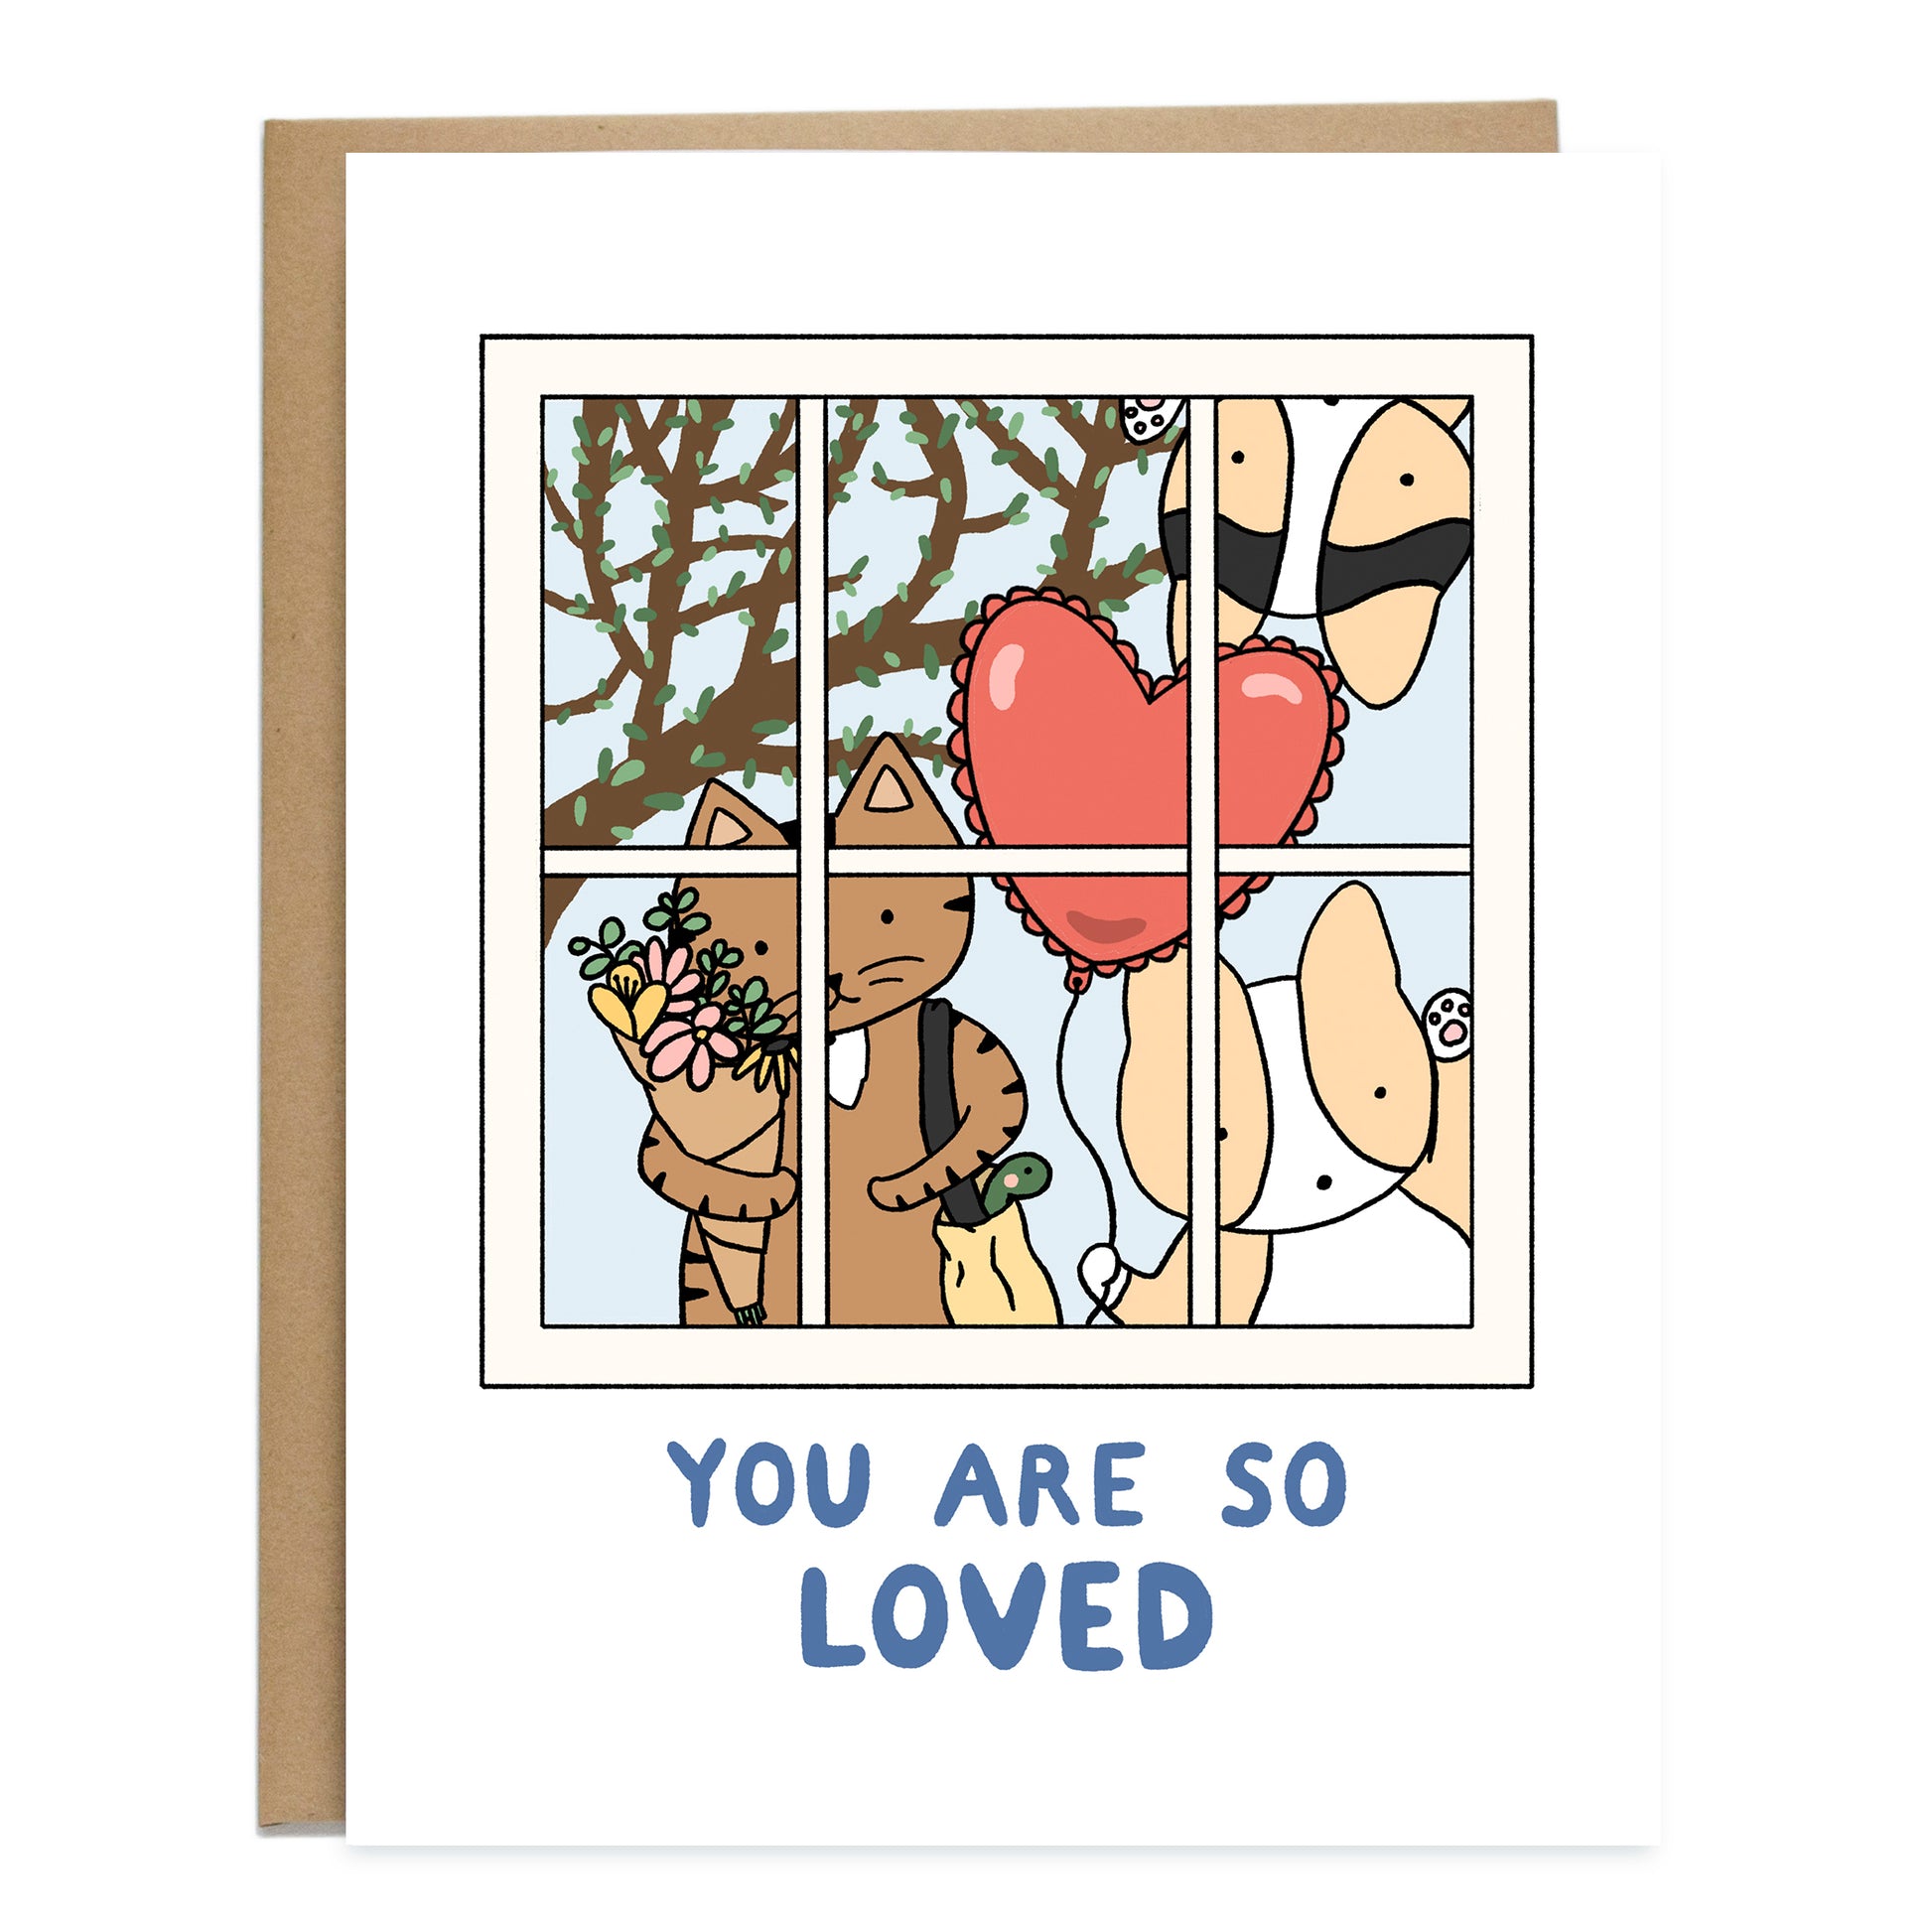 A drawing of a window, looking inside are a brown tabby cat holding a bouquet of flowers and a turtle in its tote bag, a corgi holding its hand to the glass and holding a red, heart balloon, and on the top is a tricolor corgi. The card reads, you are so loved